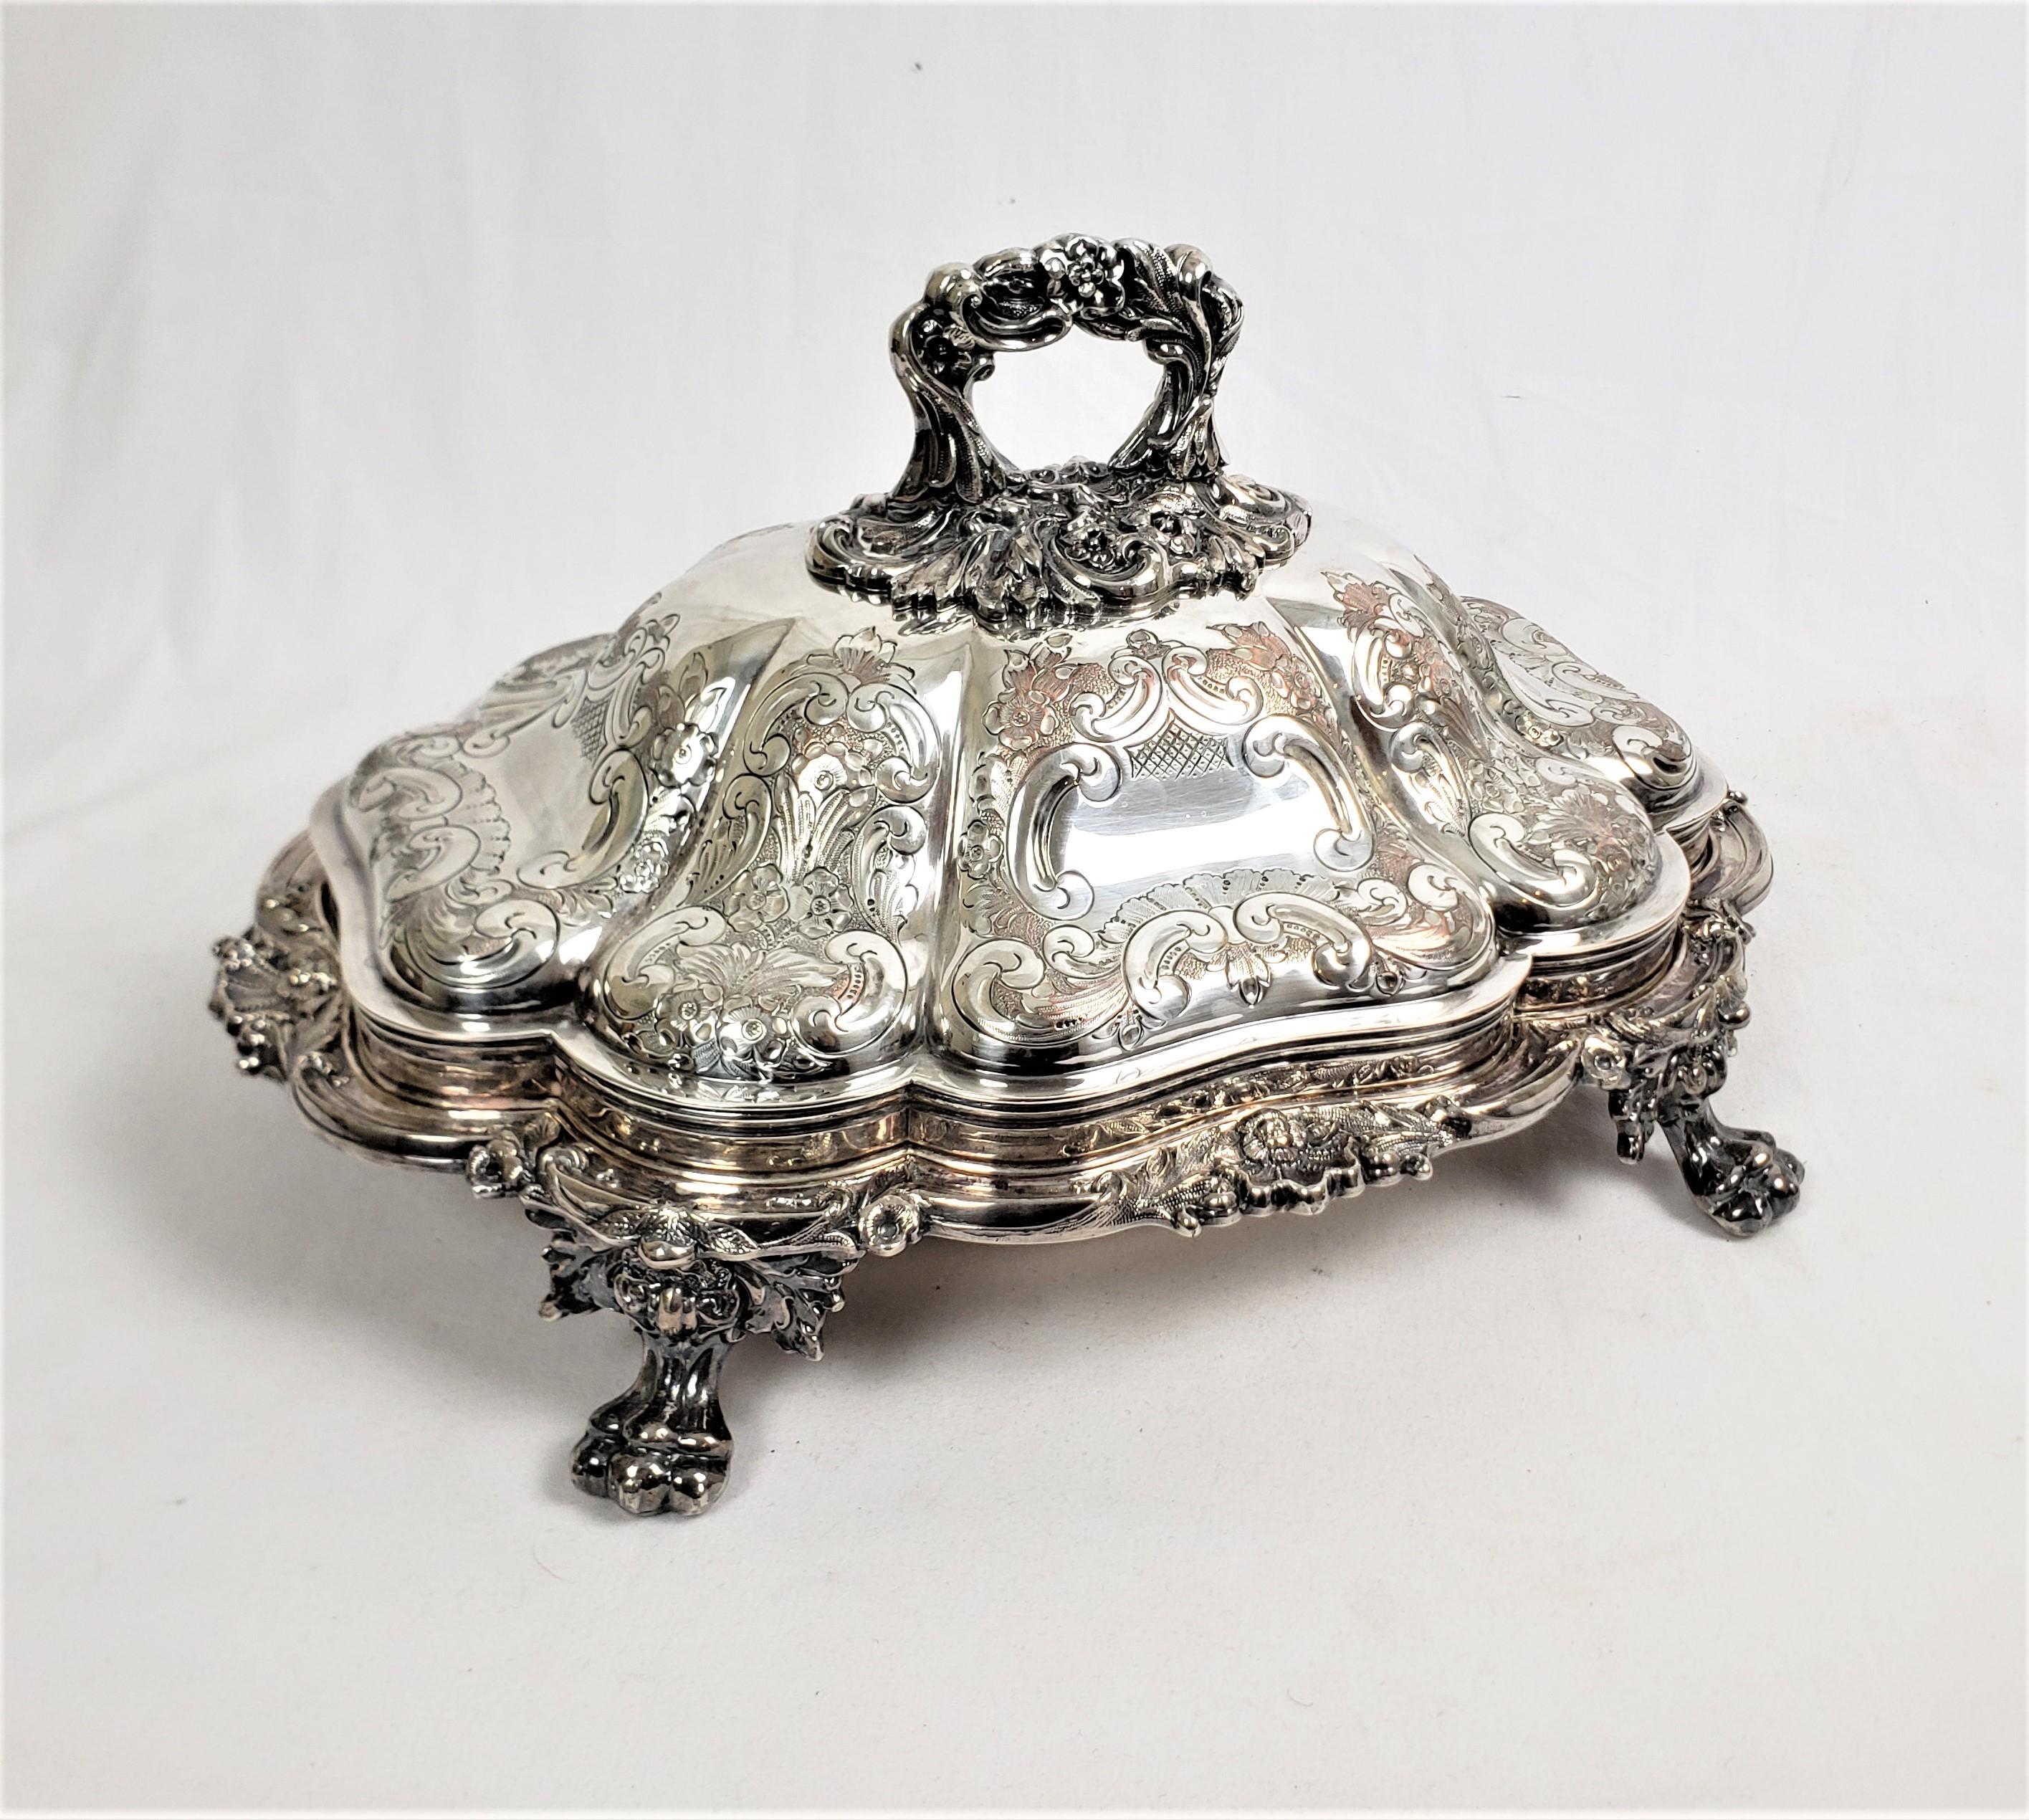 This antique silver plated covered server was made by the well known Barker Ellis Silver Company of England in approximately 1912 and done in a Victorian style. This entree server has a raised scalloped dome shaped top with ornate stylized formal